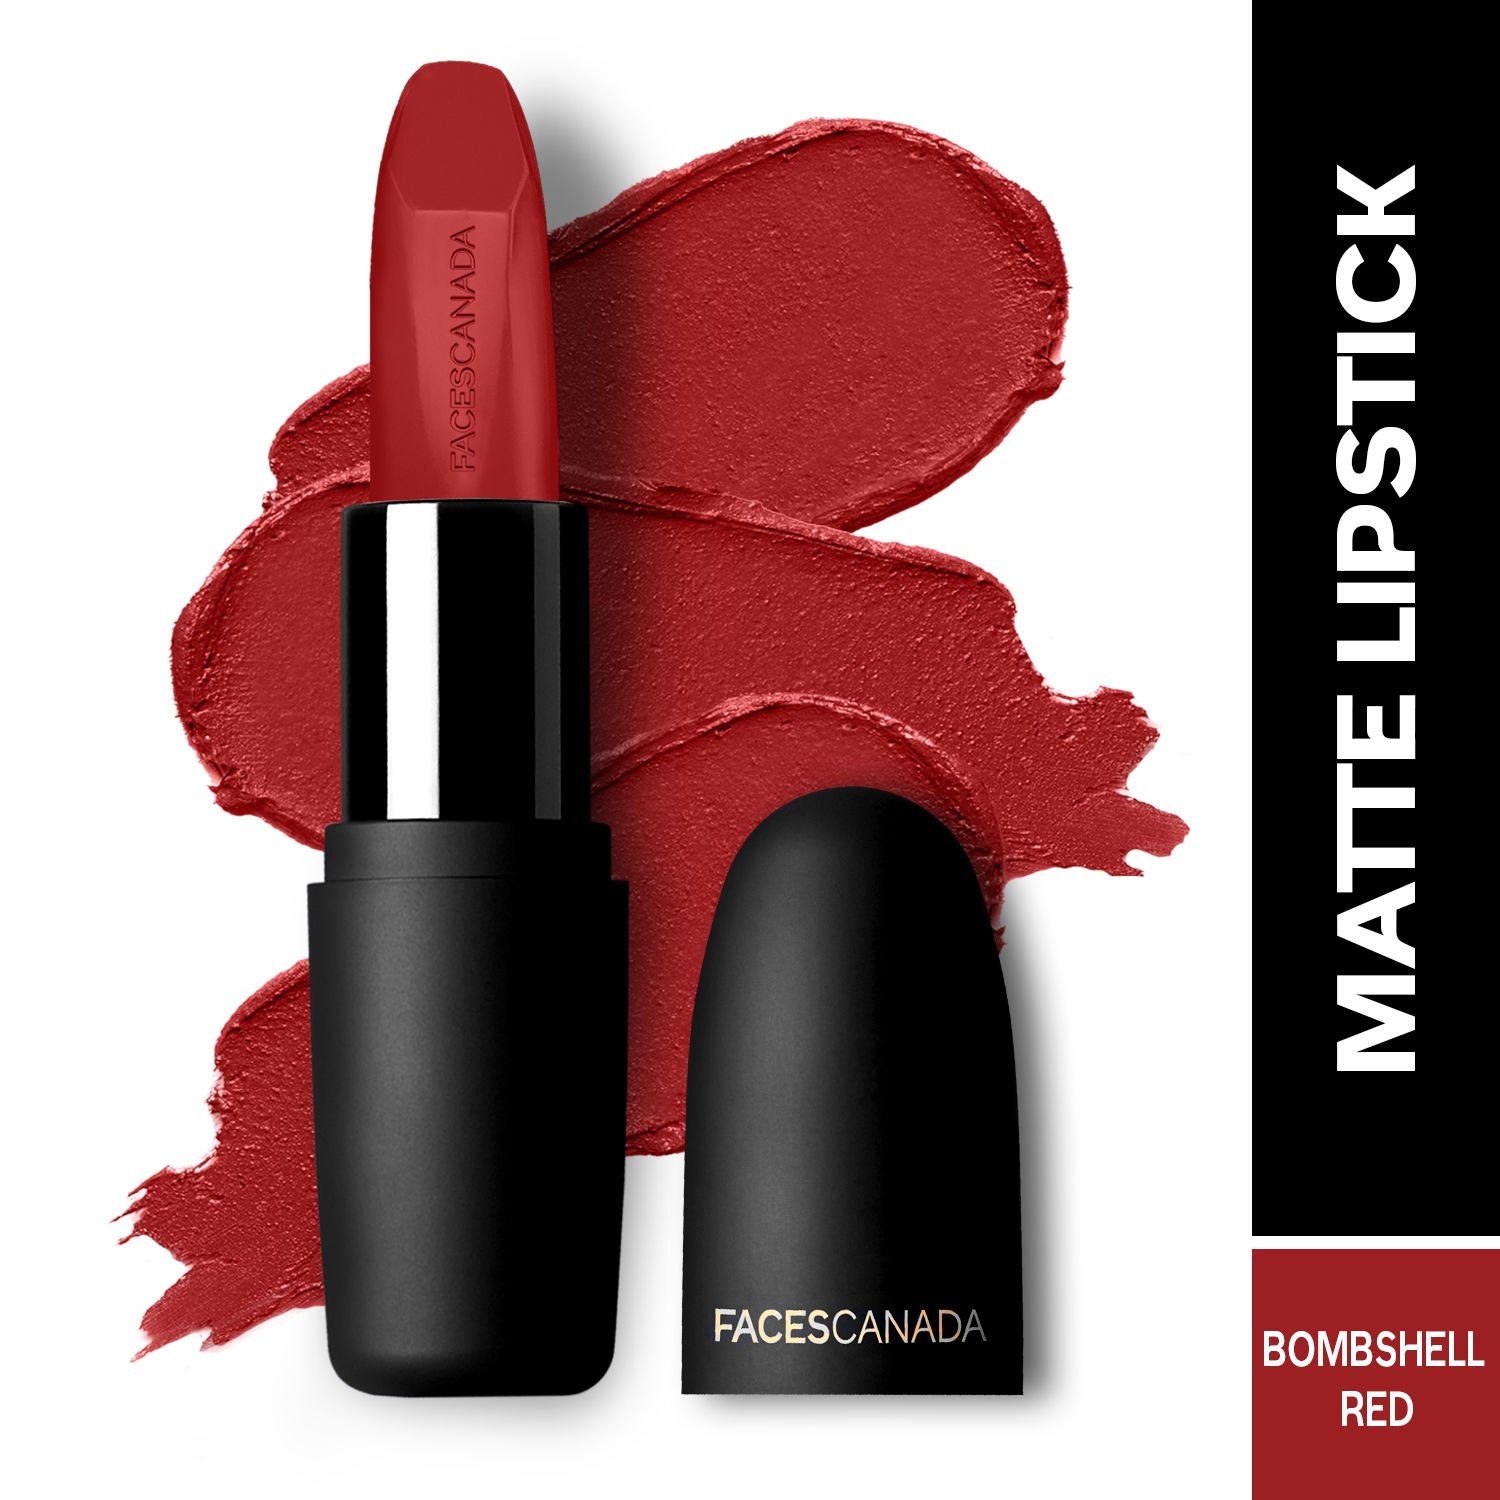 Buy FACES CANADA Weightless Matte Lipstick - Bombshell Red 09, 4.5g | High Pigment | Smooth One Stroke Glide | Moisturizes & Hydrates Lips | Vitamin E, Jojoba & Almond Oil - Purplle